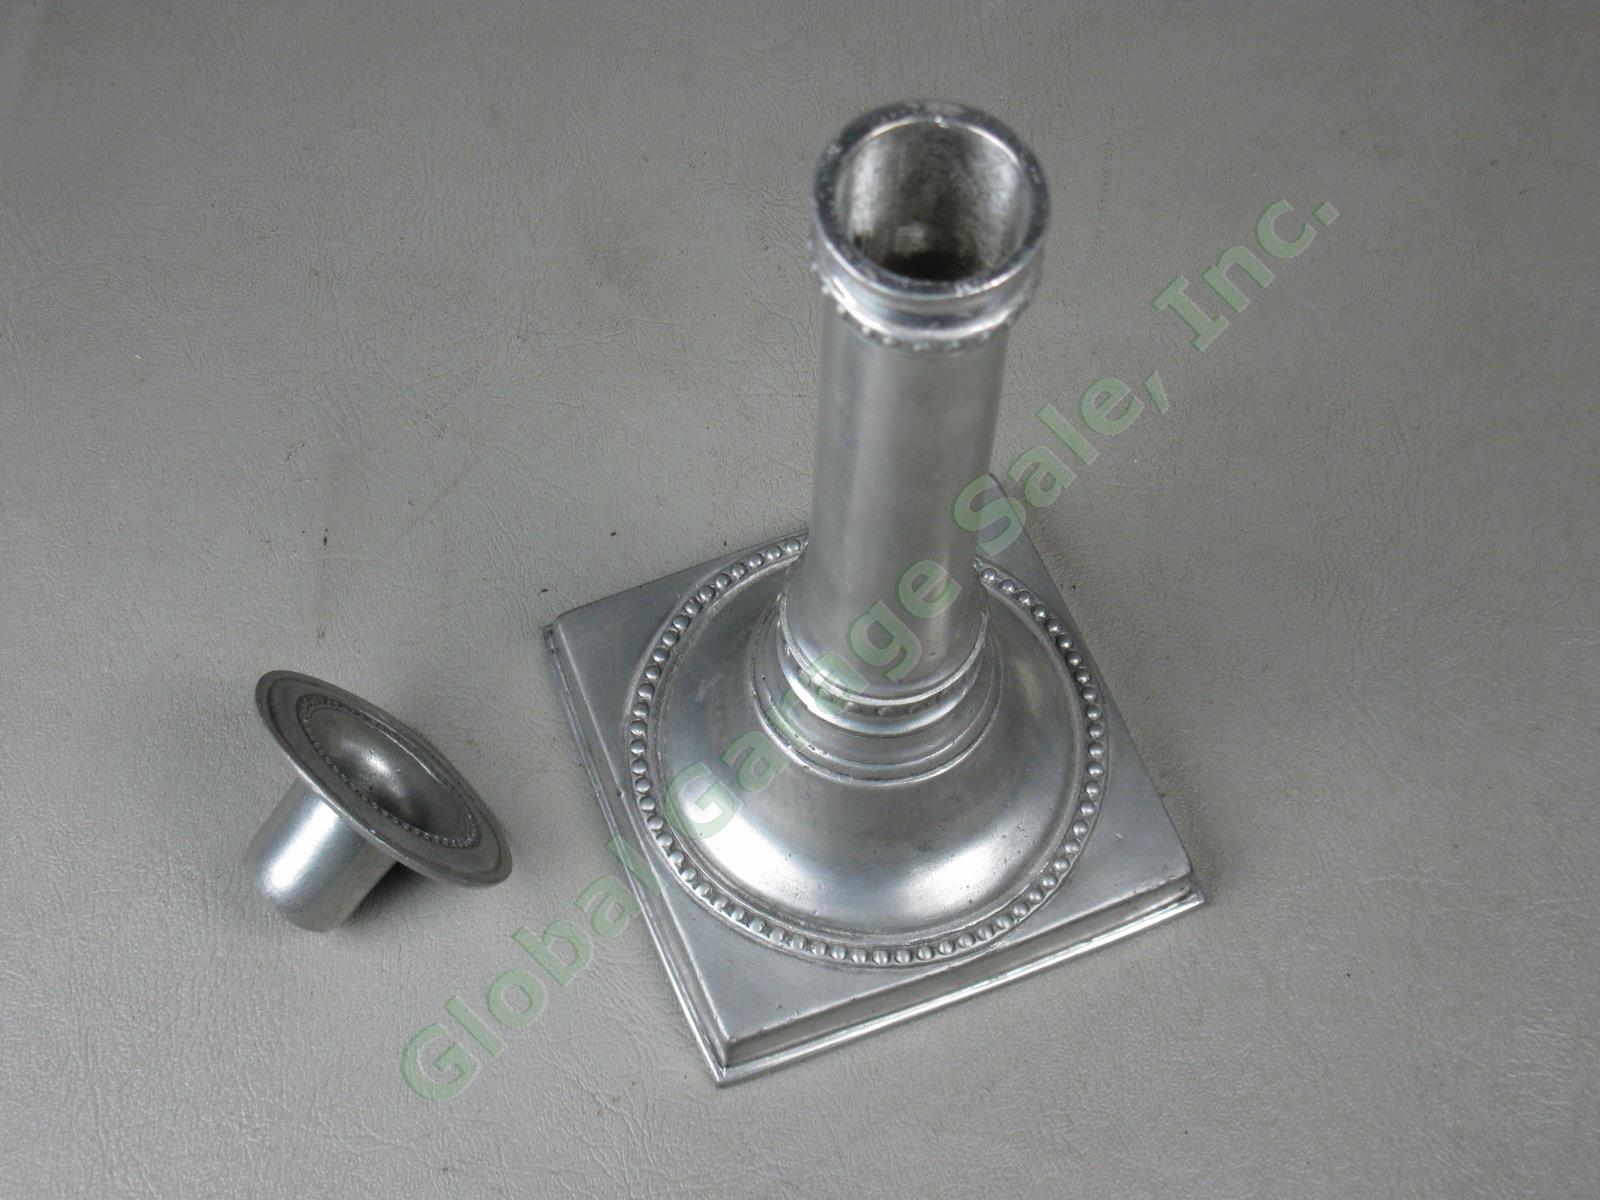 NEW Match Pewter Square Base 8" Candlestick Candle Holder Made In Italy $200 NR! 5